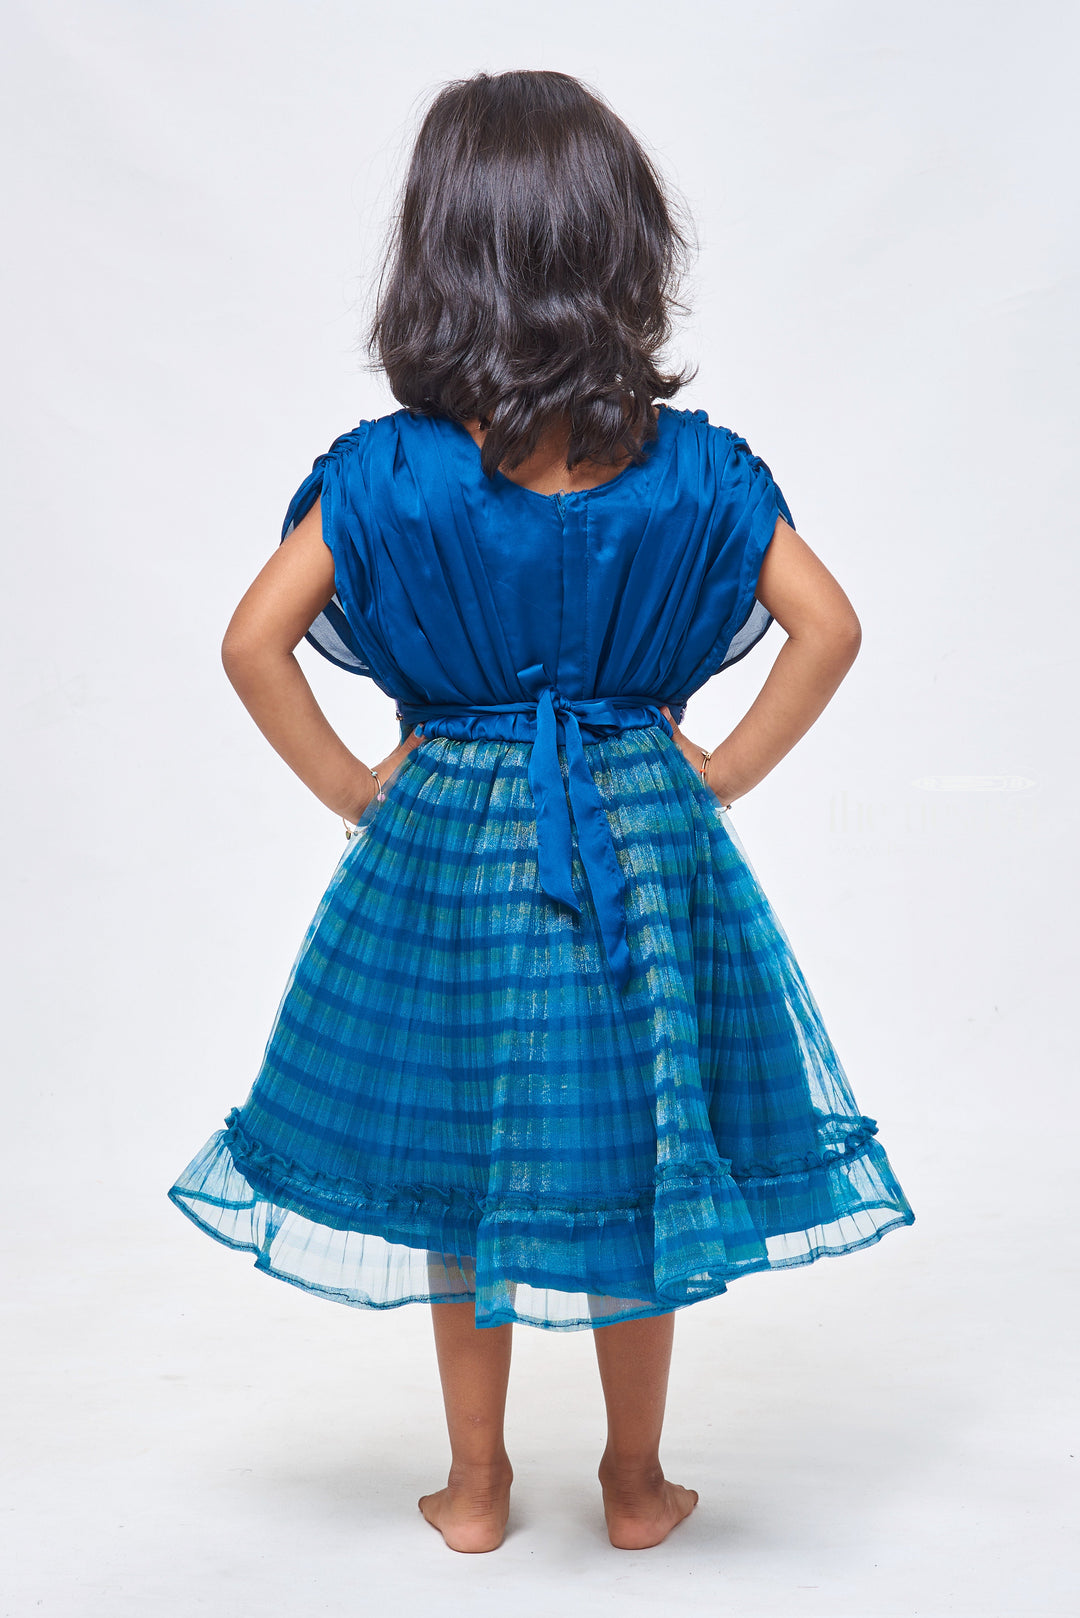 The Nesavu Girls Fancy Party Frock Dazzling Blue Gala Frock for Girls: Adorned with Rhinestones & Reflective Mirror Accents Nesavu 1YEAR Old Baby Girl Birthday Frock | Baby Birthday Dress | the Nesavu